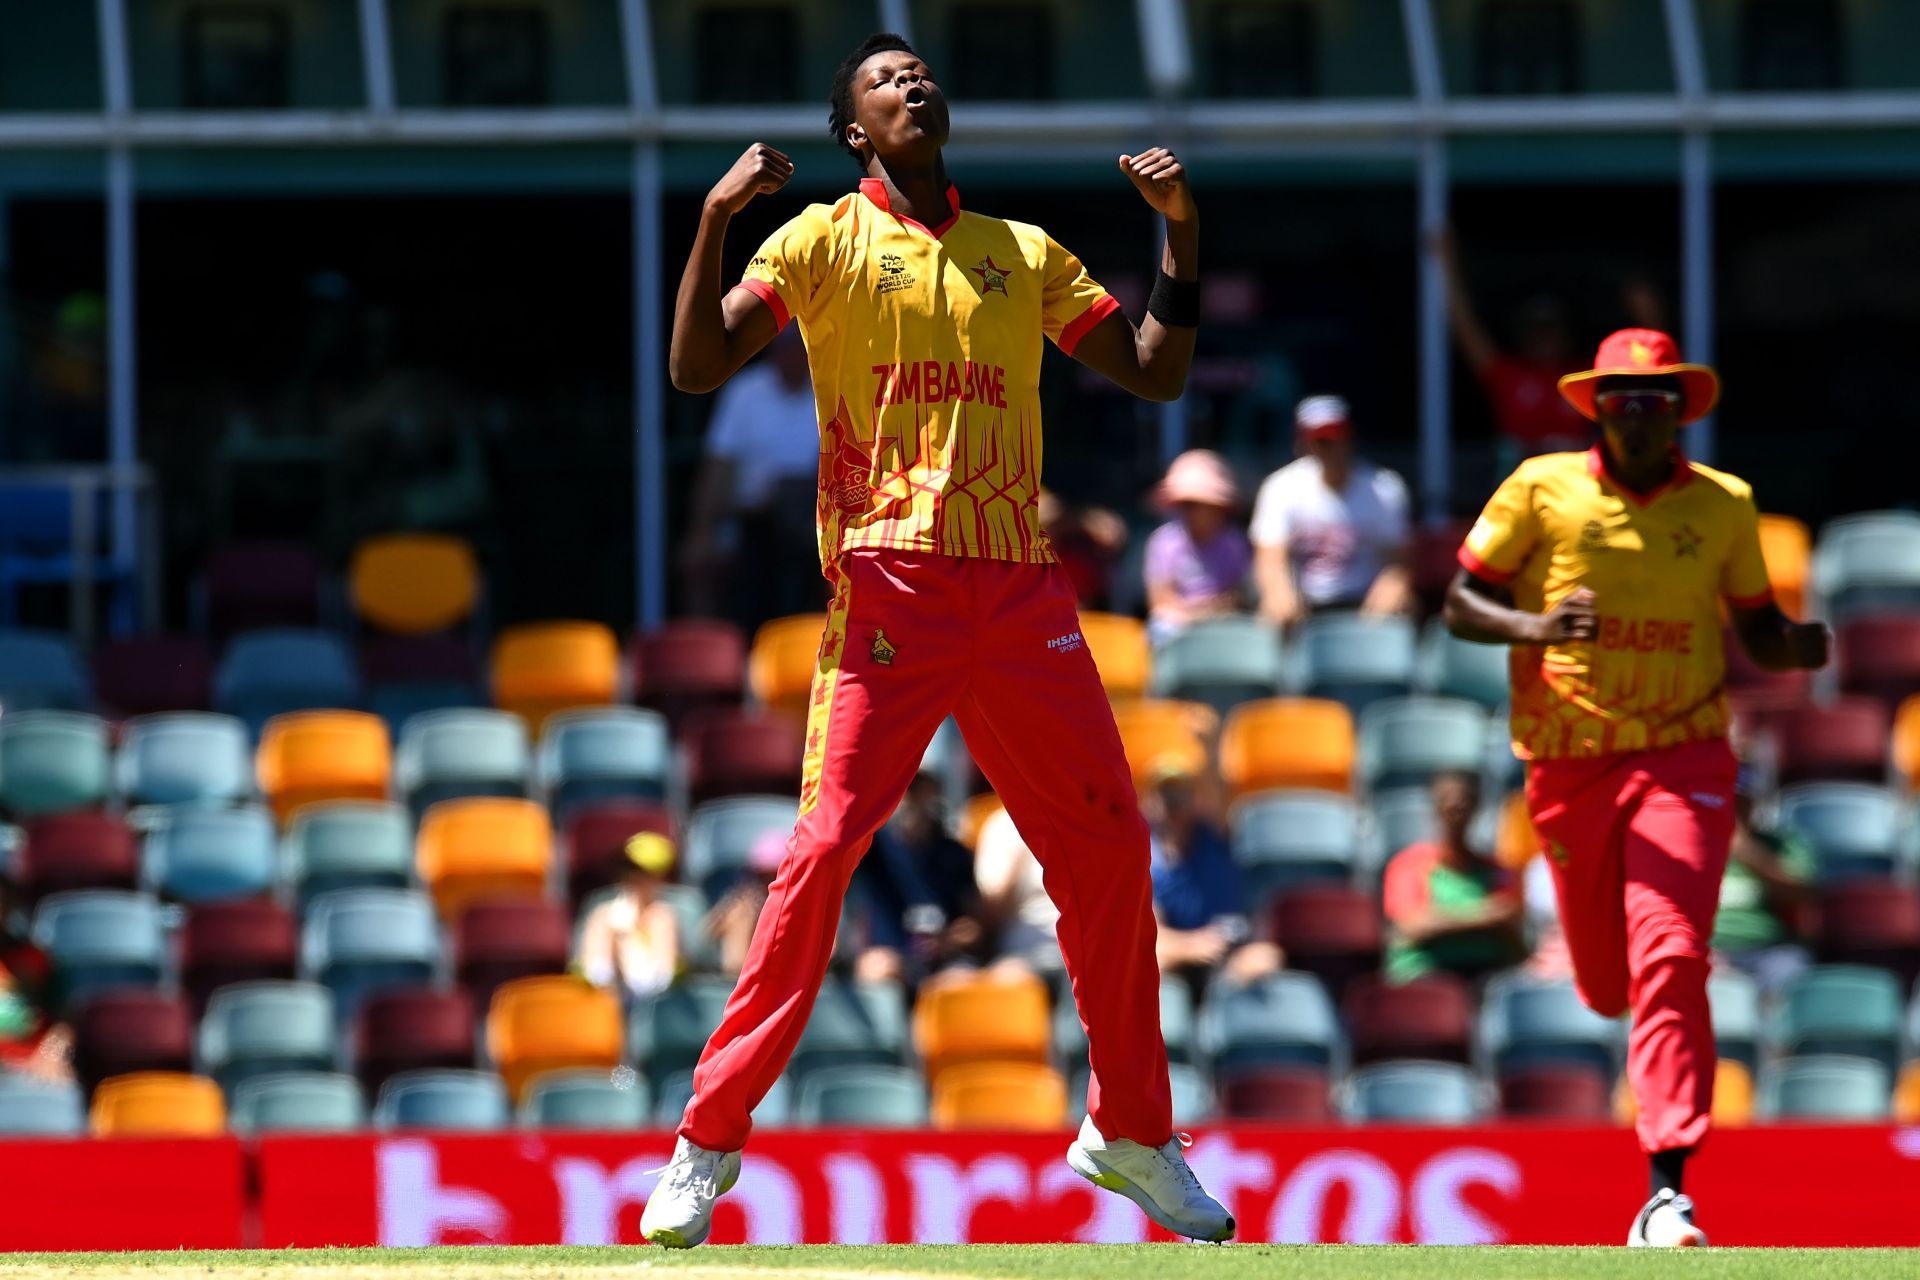 Blessing Muzarabani is the second-leading wicket-taker in the competition